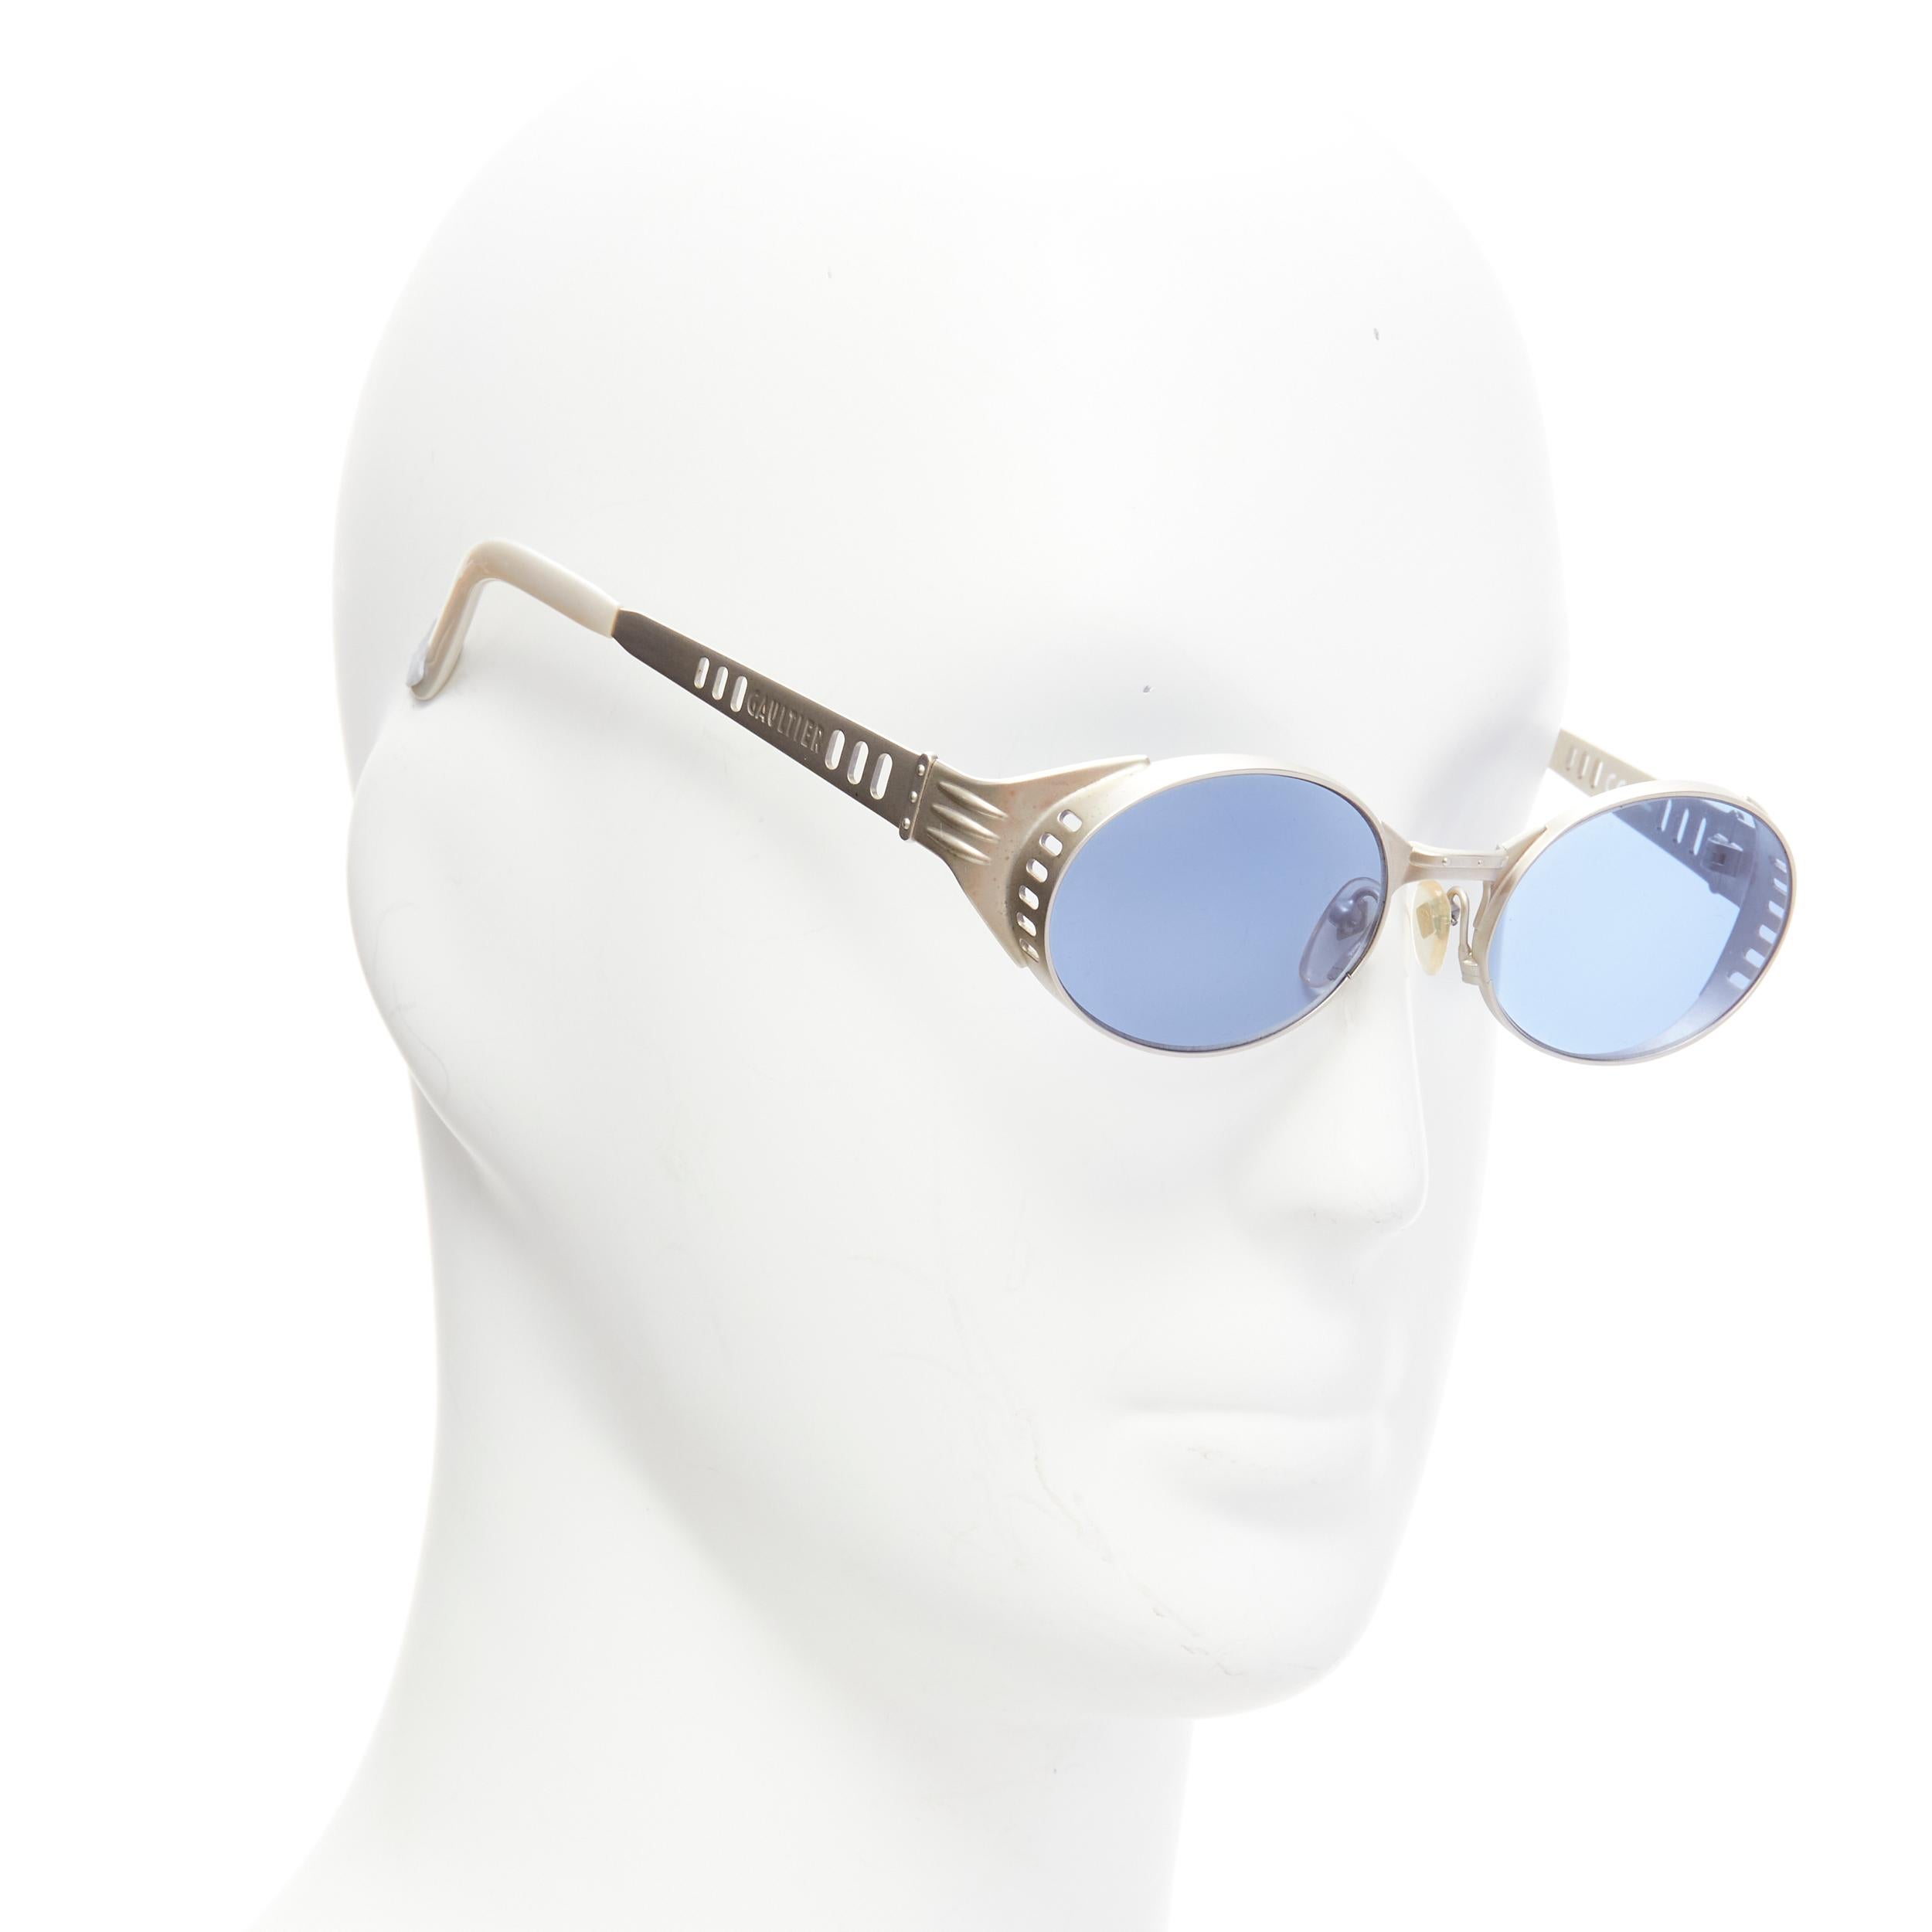 rare JEAN PAUL GAULTIER Vintage 56-6102 matte silver steam punk blue lenses round sunglasses
Reference: TGAS/D00104
Brand: Jean Paul Gaultier
Designer: Jean Paul Gaultier
Model: 56-6102
Material: Metal
Color: Blue, Silver
Pattern: Solid
Closure: